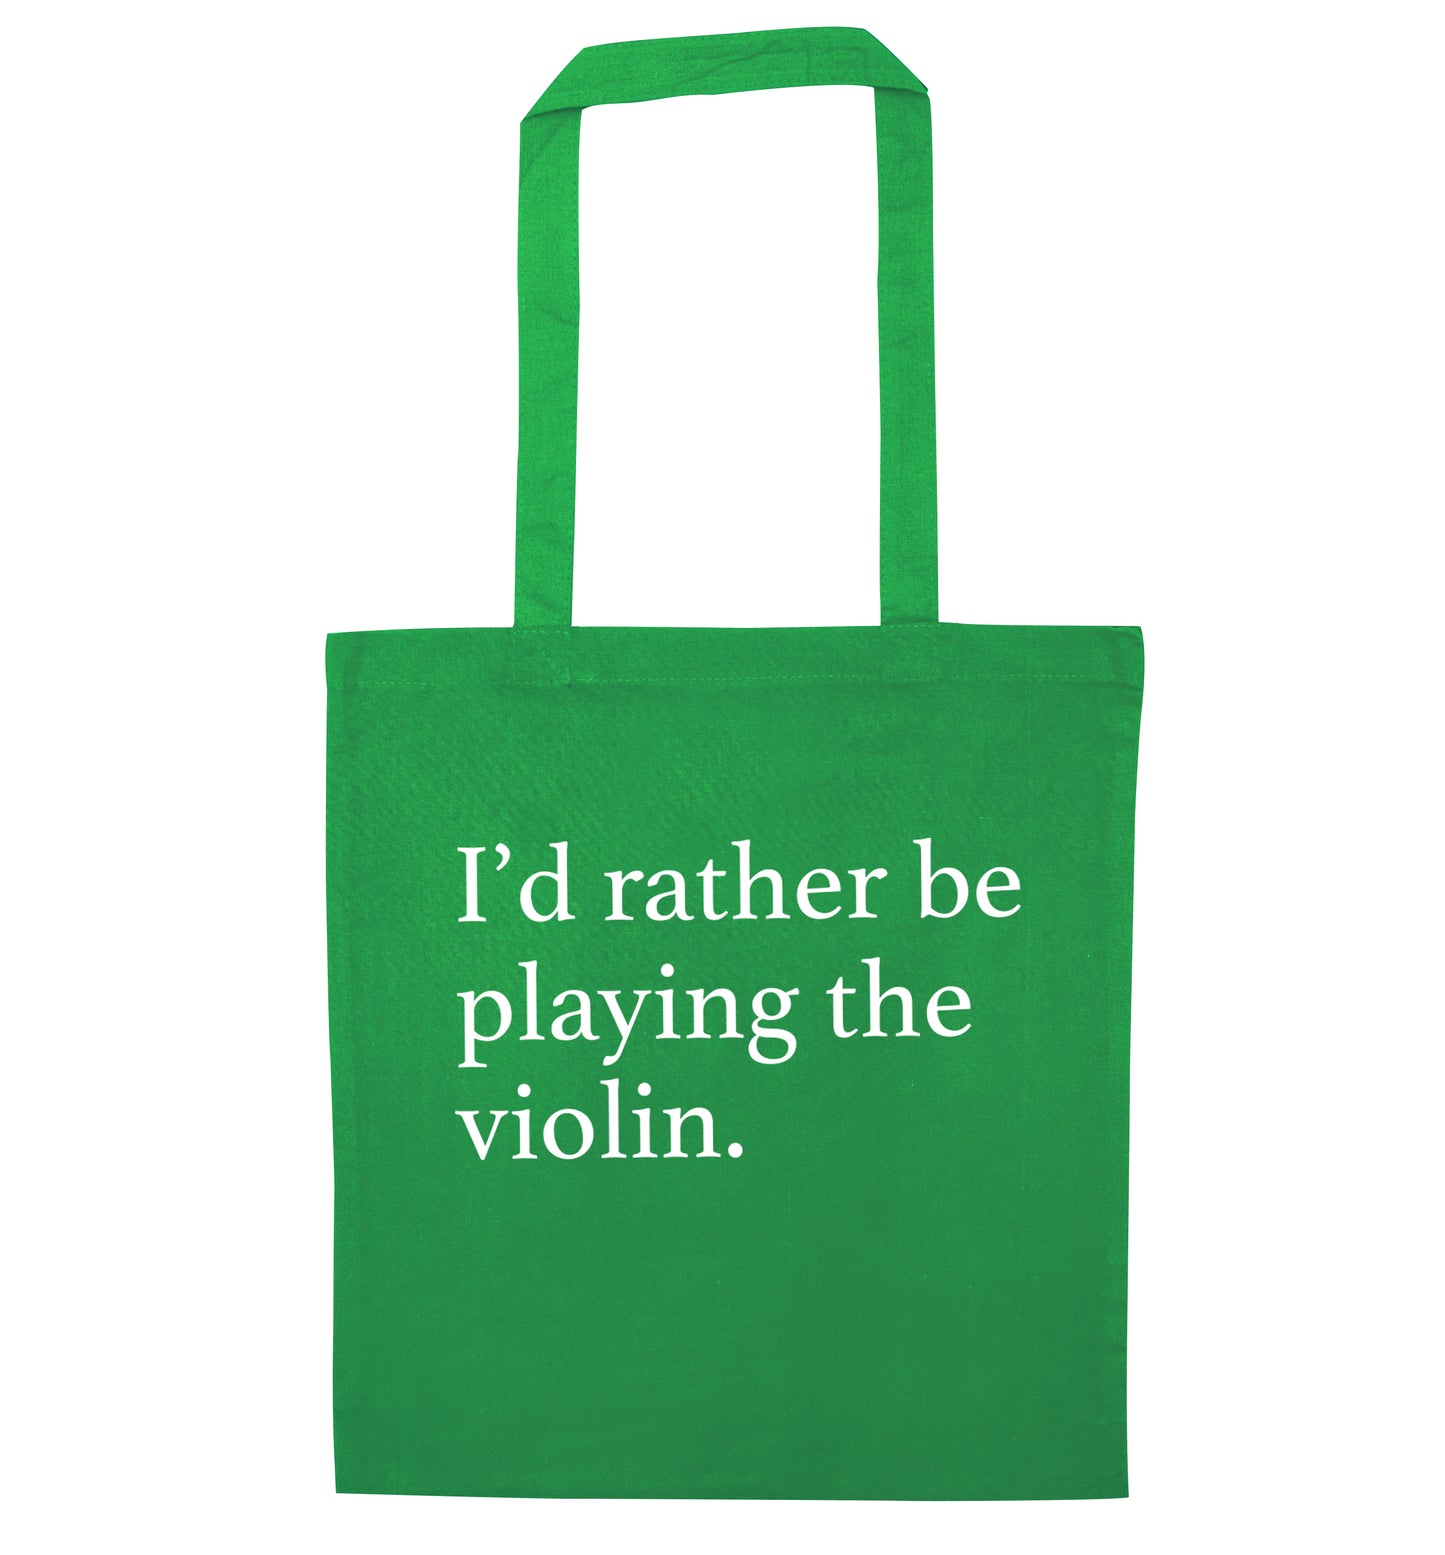 I'd rather be playing the violin green tote bag